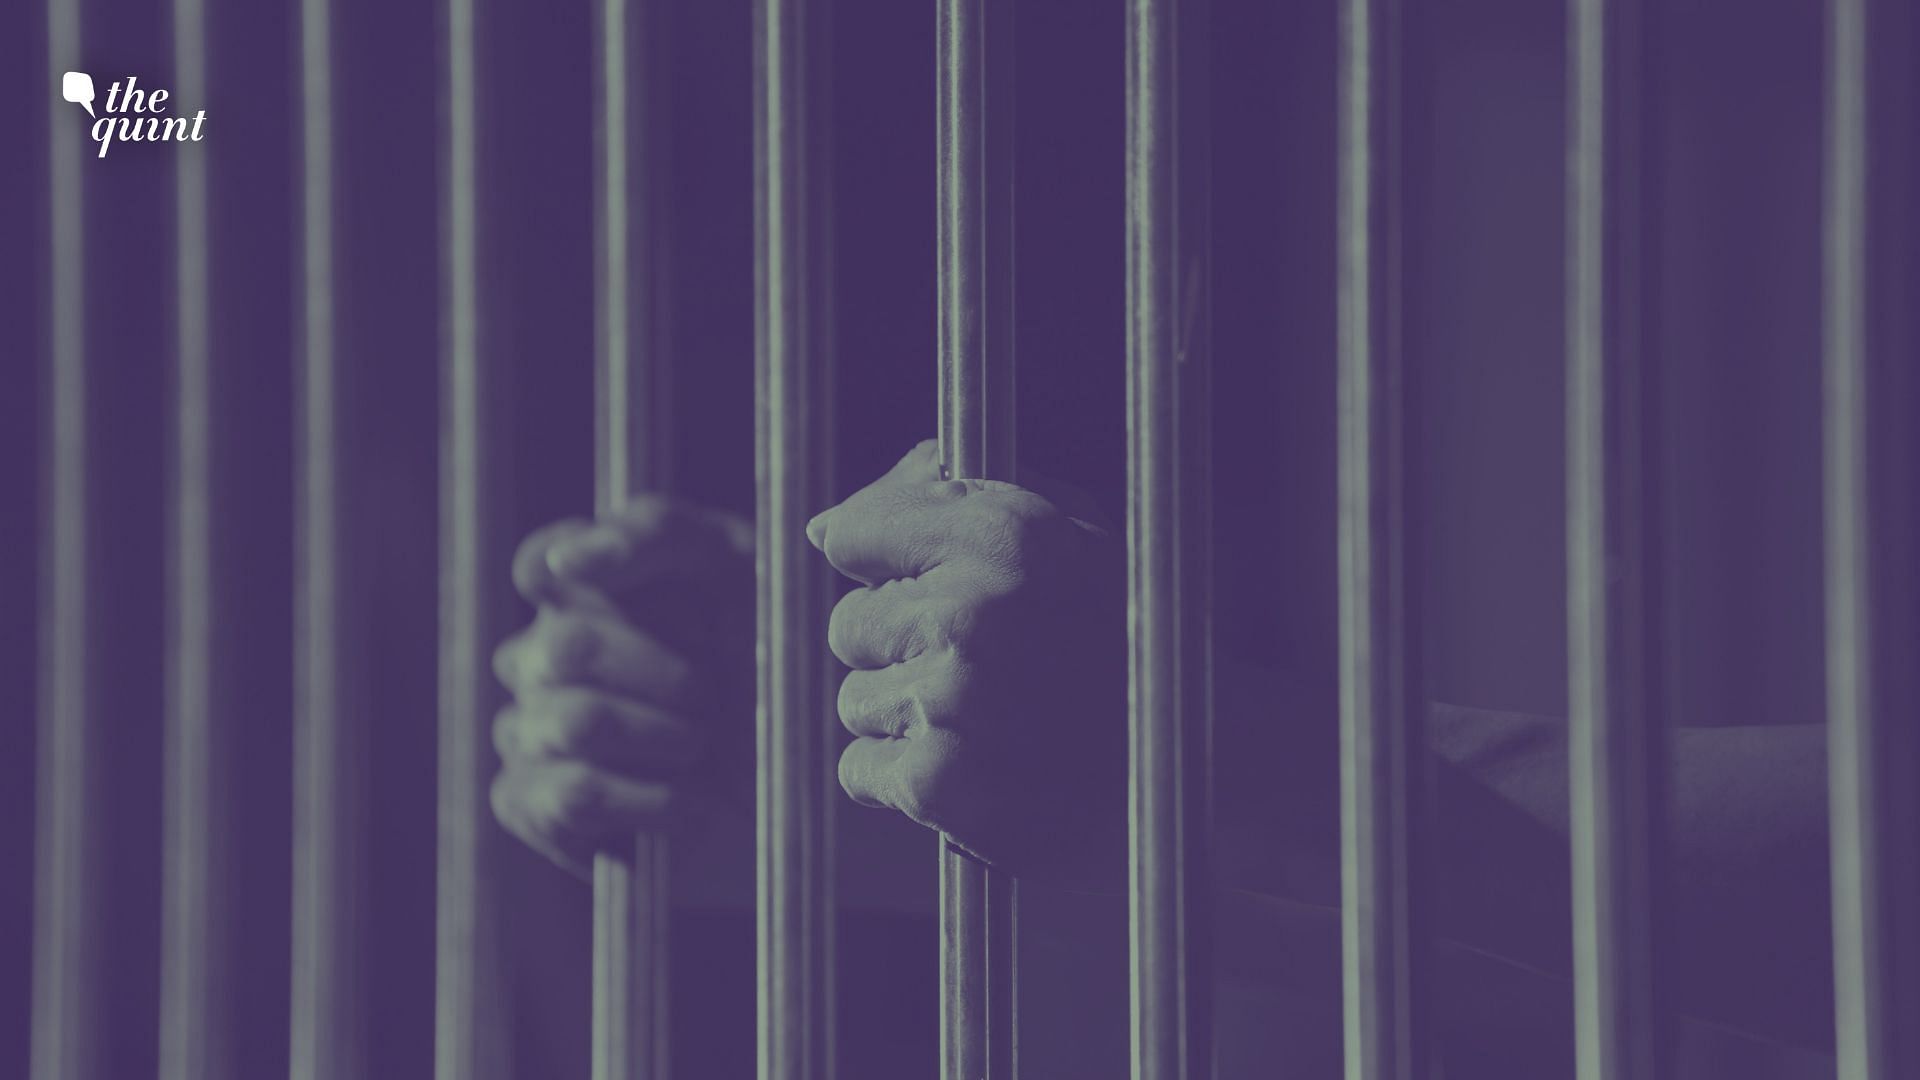 <div class="paragraphs"><p>News media was abuzz with reports of a 75-year-old man being sentenced to&nbsp;<a href="https://www.thequint.com/topic/life-imprisonment">life imprisonment </a>after he was <a href="https://www.thequint.com/neon/gender/convicts-in-gang-rape-and-murder-case-released-bilkis-banos-family-surprised">convicted</a> of&nbsp;<a href="https://www.thequint.com/news/india/old-man-life-imprisonment-digital-rape-minor-noida#read-more">'digital rape</a>' of a three-year-old.</p></div>